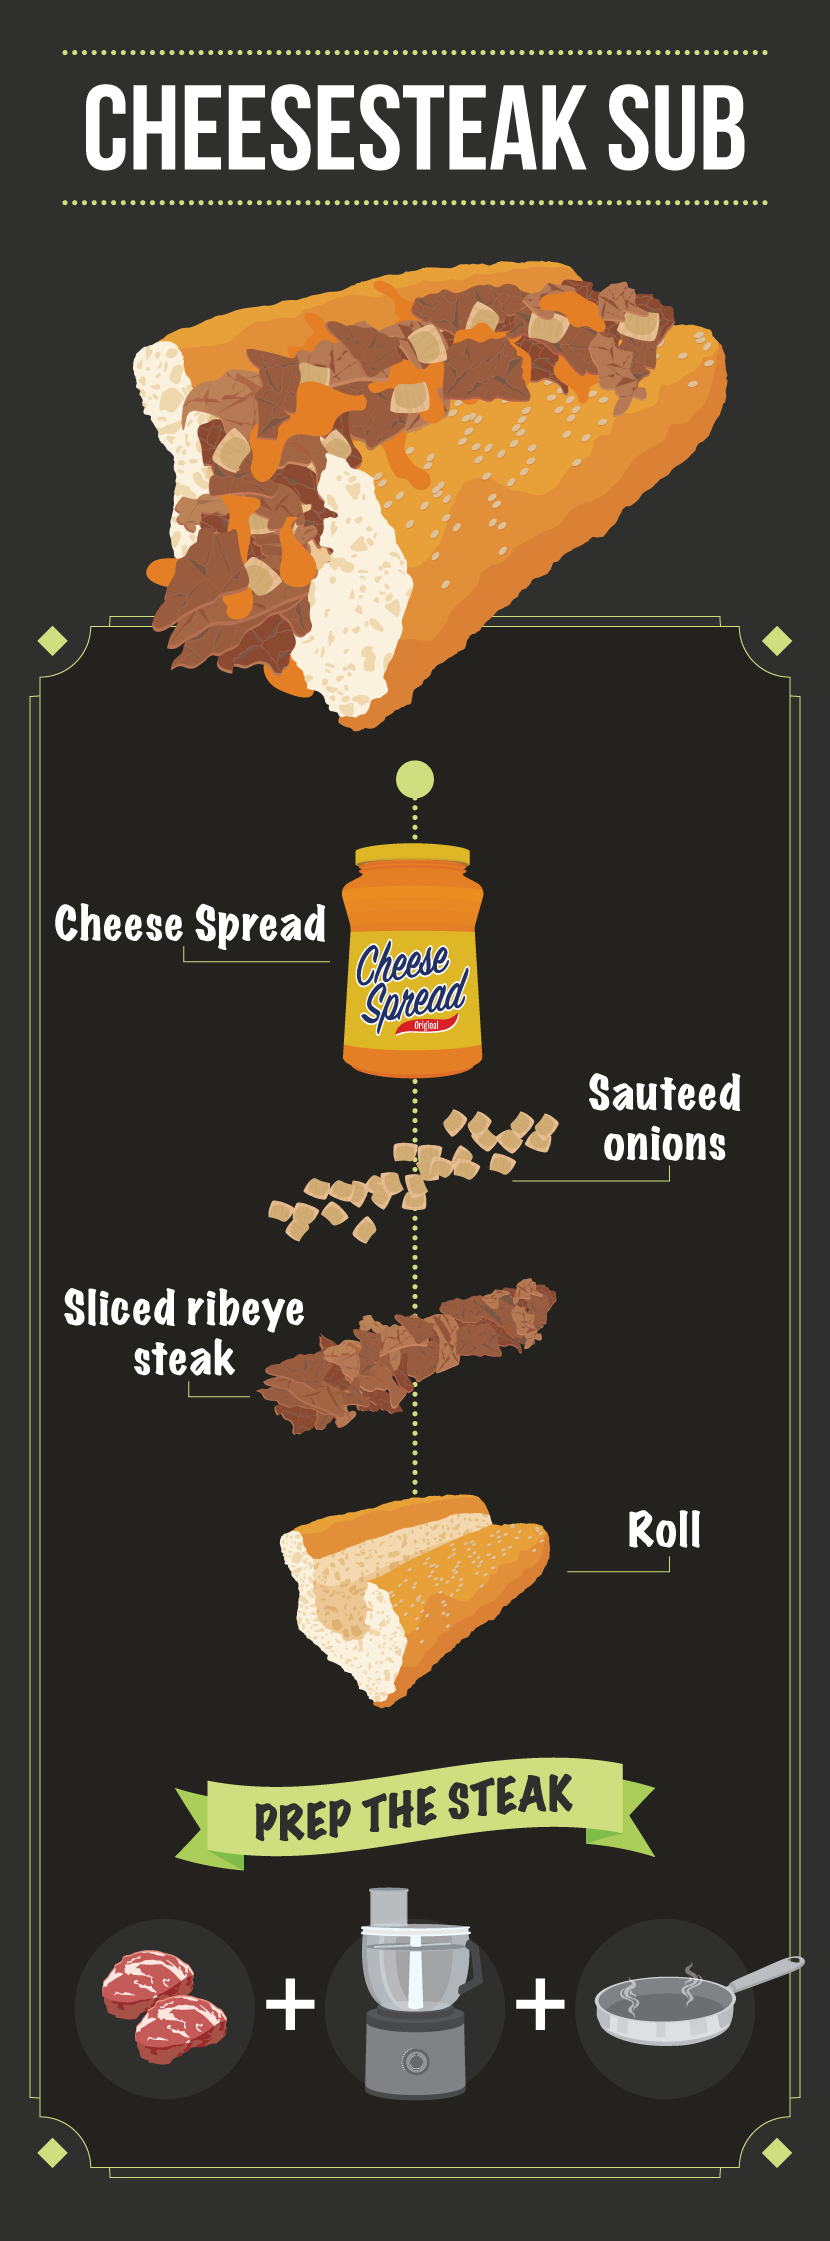 Cheesesteak Sub - How to Make the Perfect sub